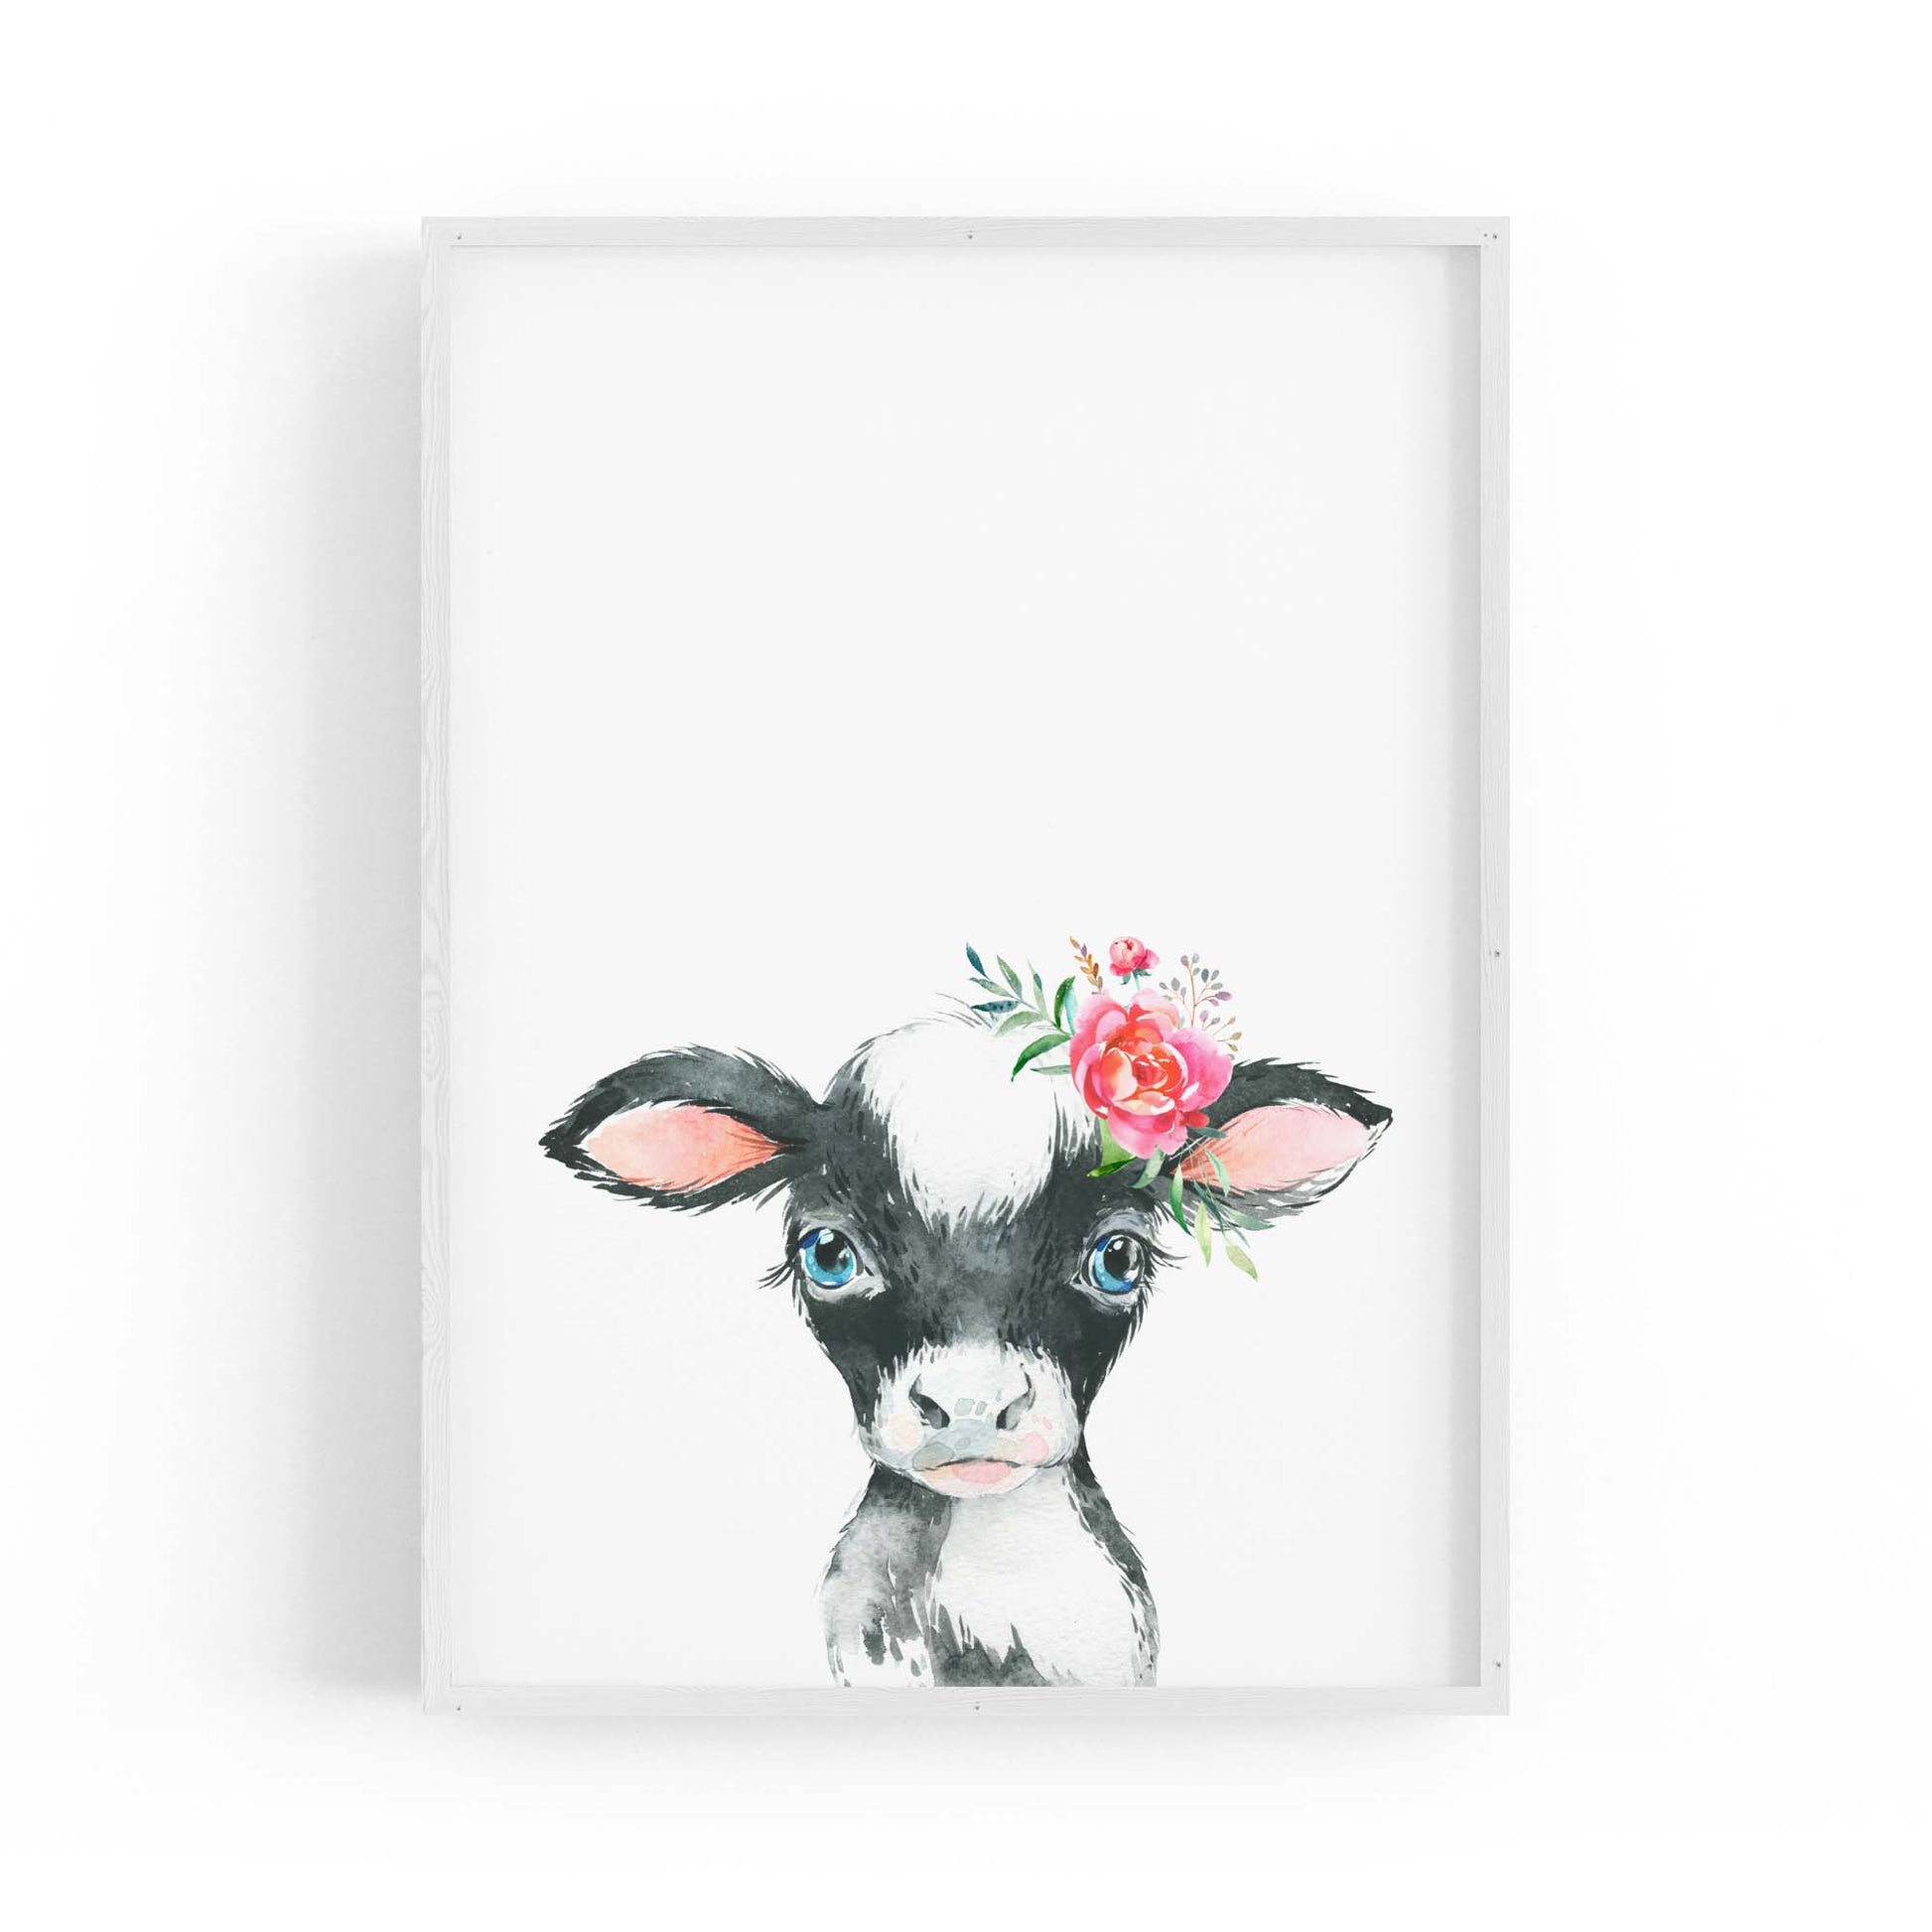 Cute Baby Cow Nursery Animal Gift Wall Art #1 - The Affordable Art Company